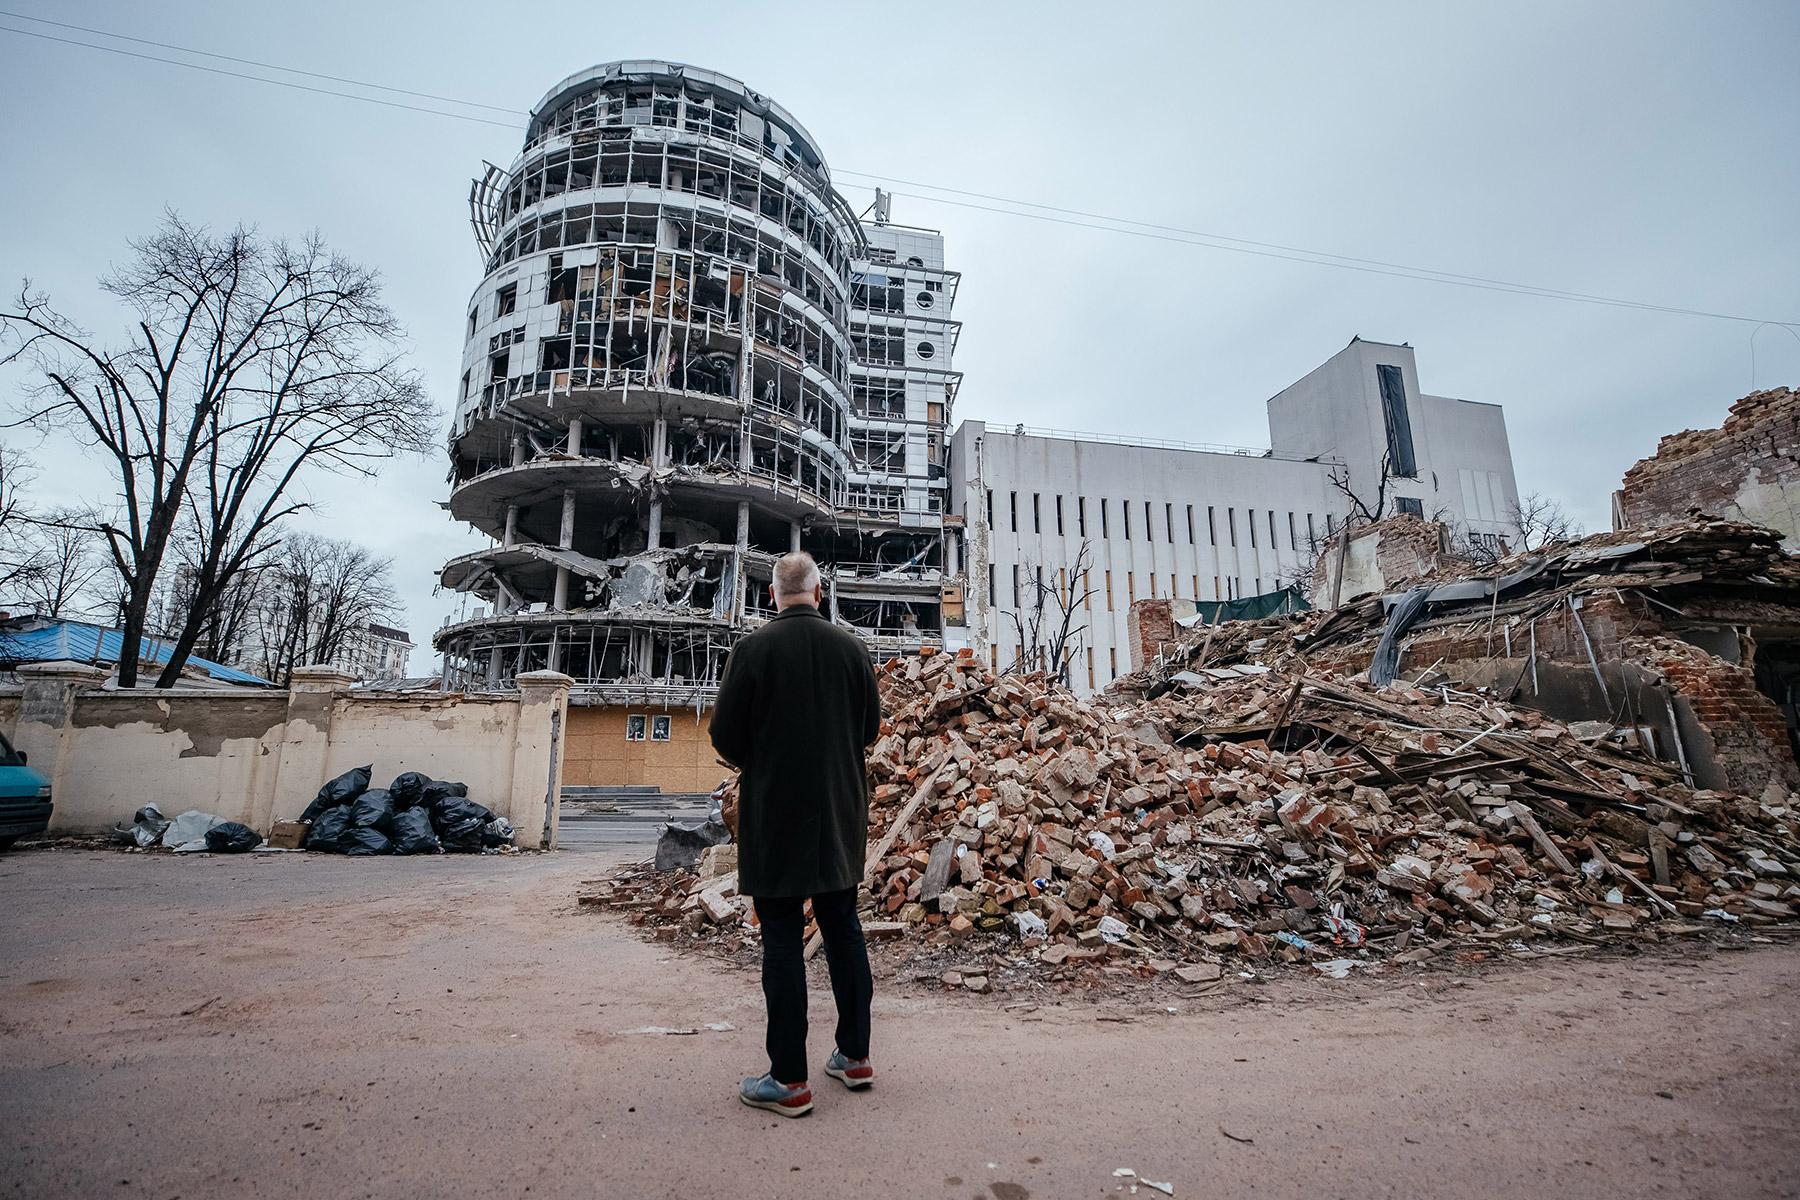 LWF team leader Mark Mullan visits a residental area which has largely been destroyed by missile strikes in Kharkiv. Photo: LWF/ Anatolyi Nazarenko